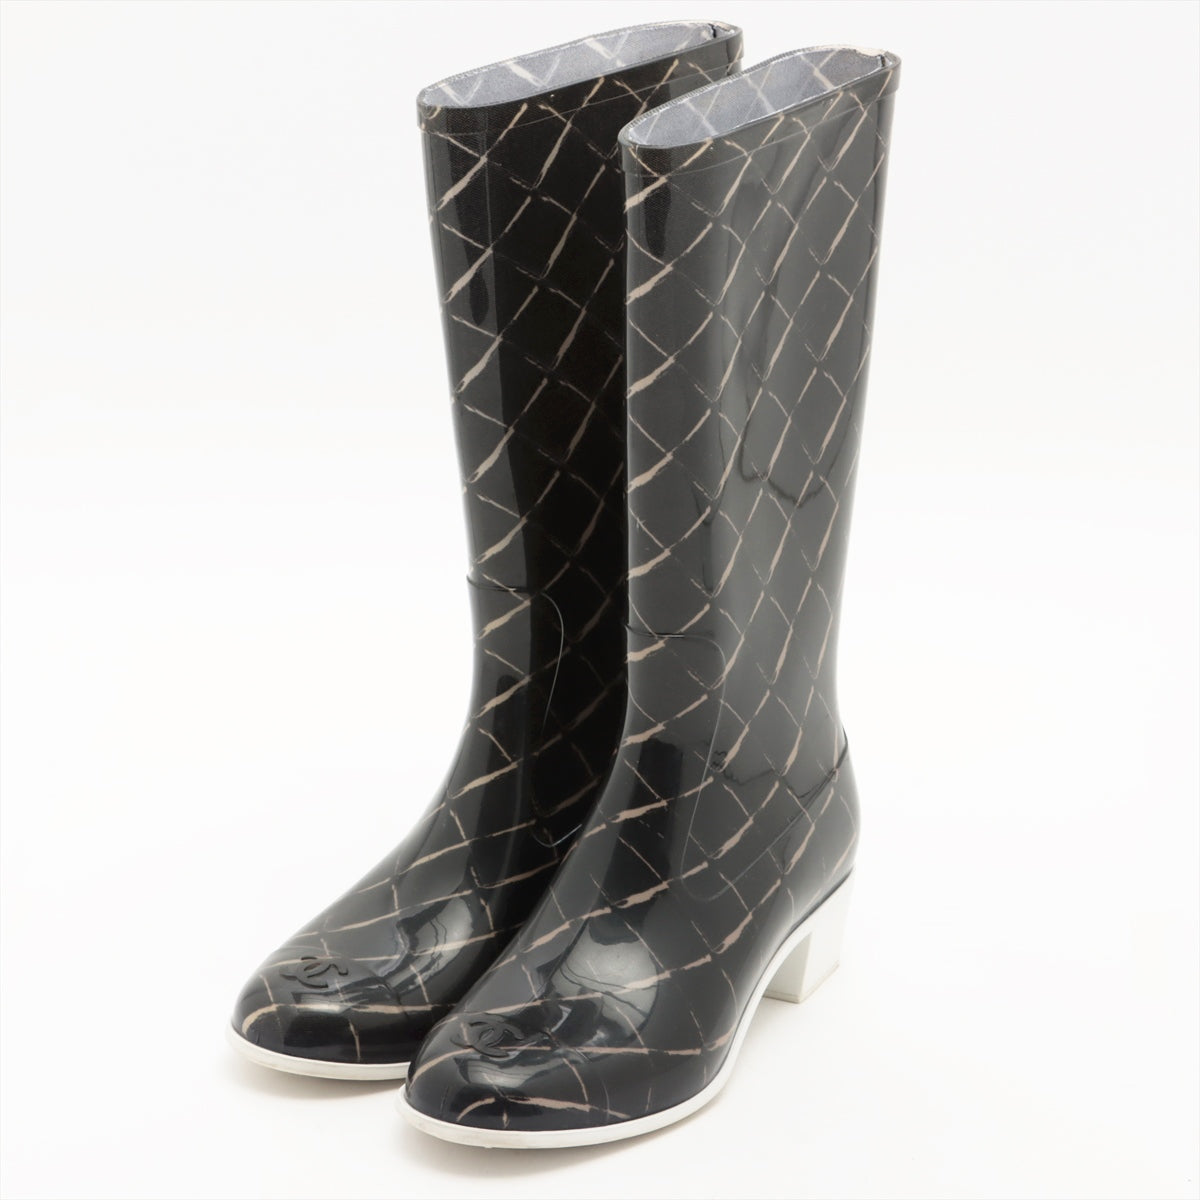 Chanel Coco Mark Rubber Rain boots 35 Ladies' black x beige upper insoles There is dirt on the heel